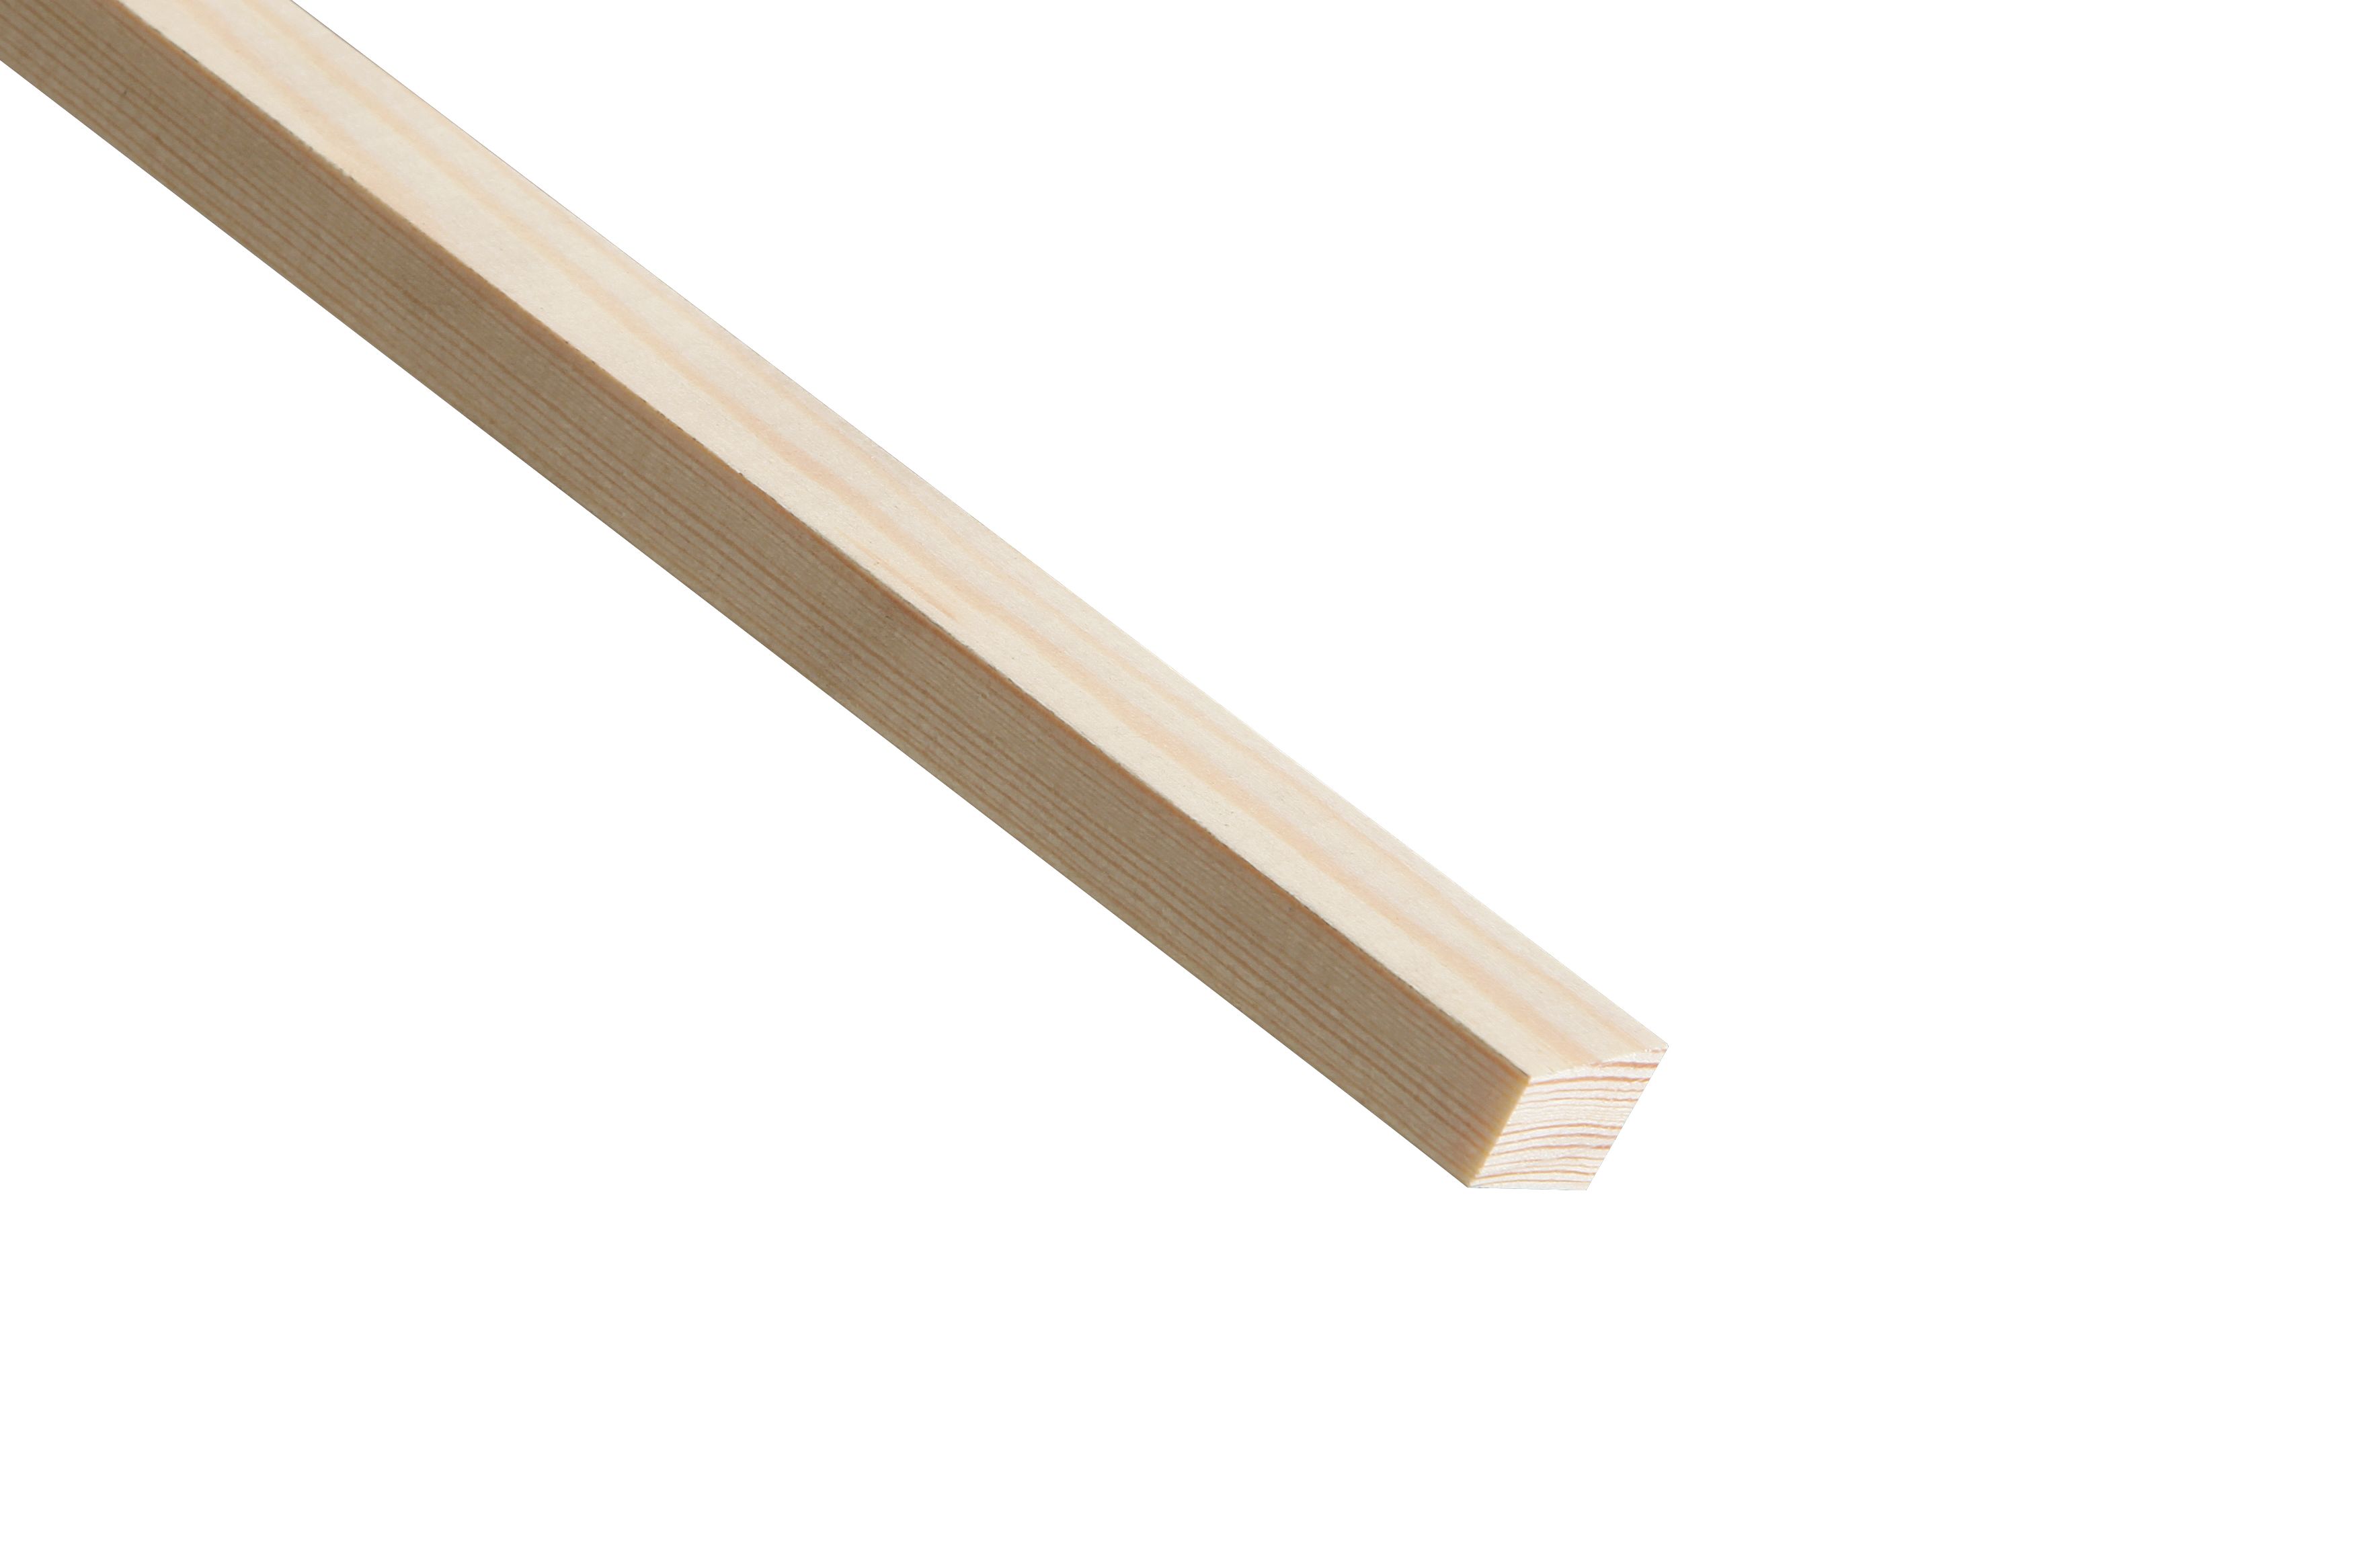 Image of Wickes Pine Wedge Bead Moulding - 15 x 12 x 2400mm